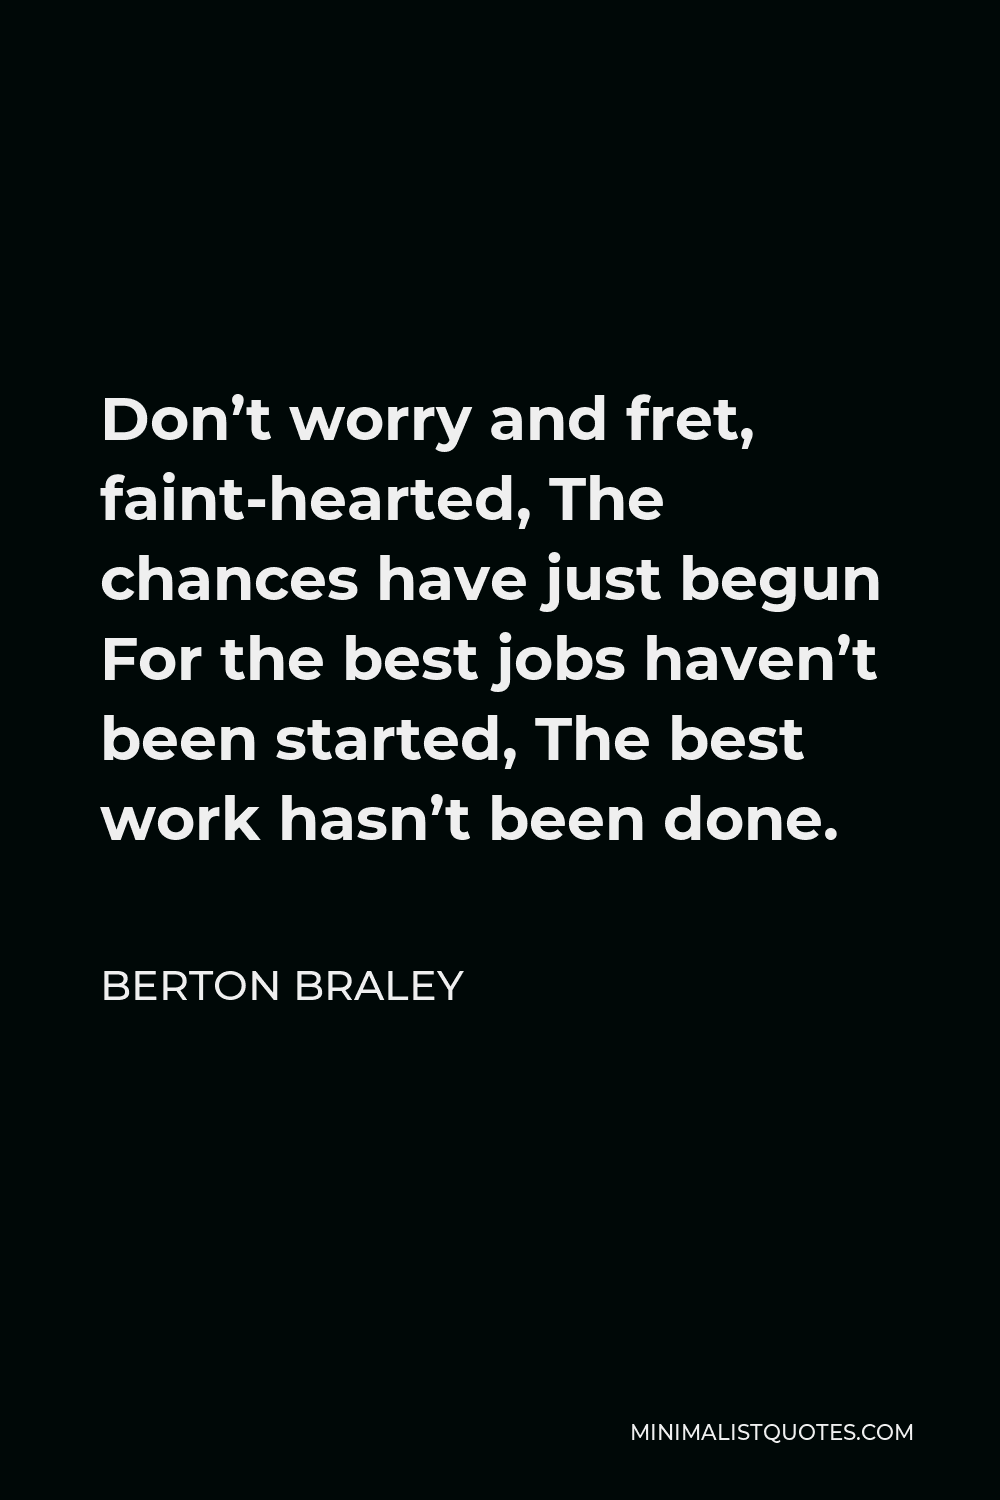 Berton Braley Quote - Don’t worry and fret, faint-hearted, The chances have just begun For the best jobs haven’t been started, The best work hasn’t been done.